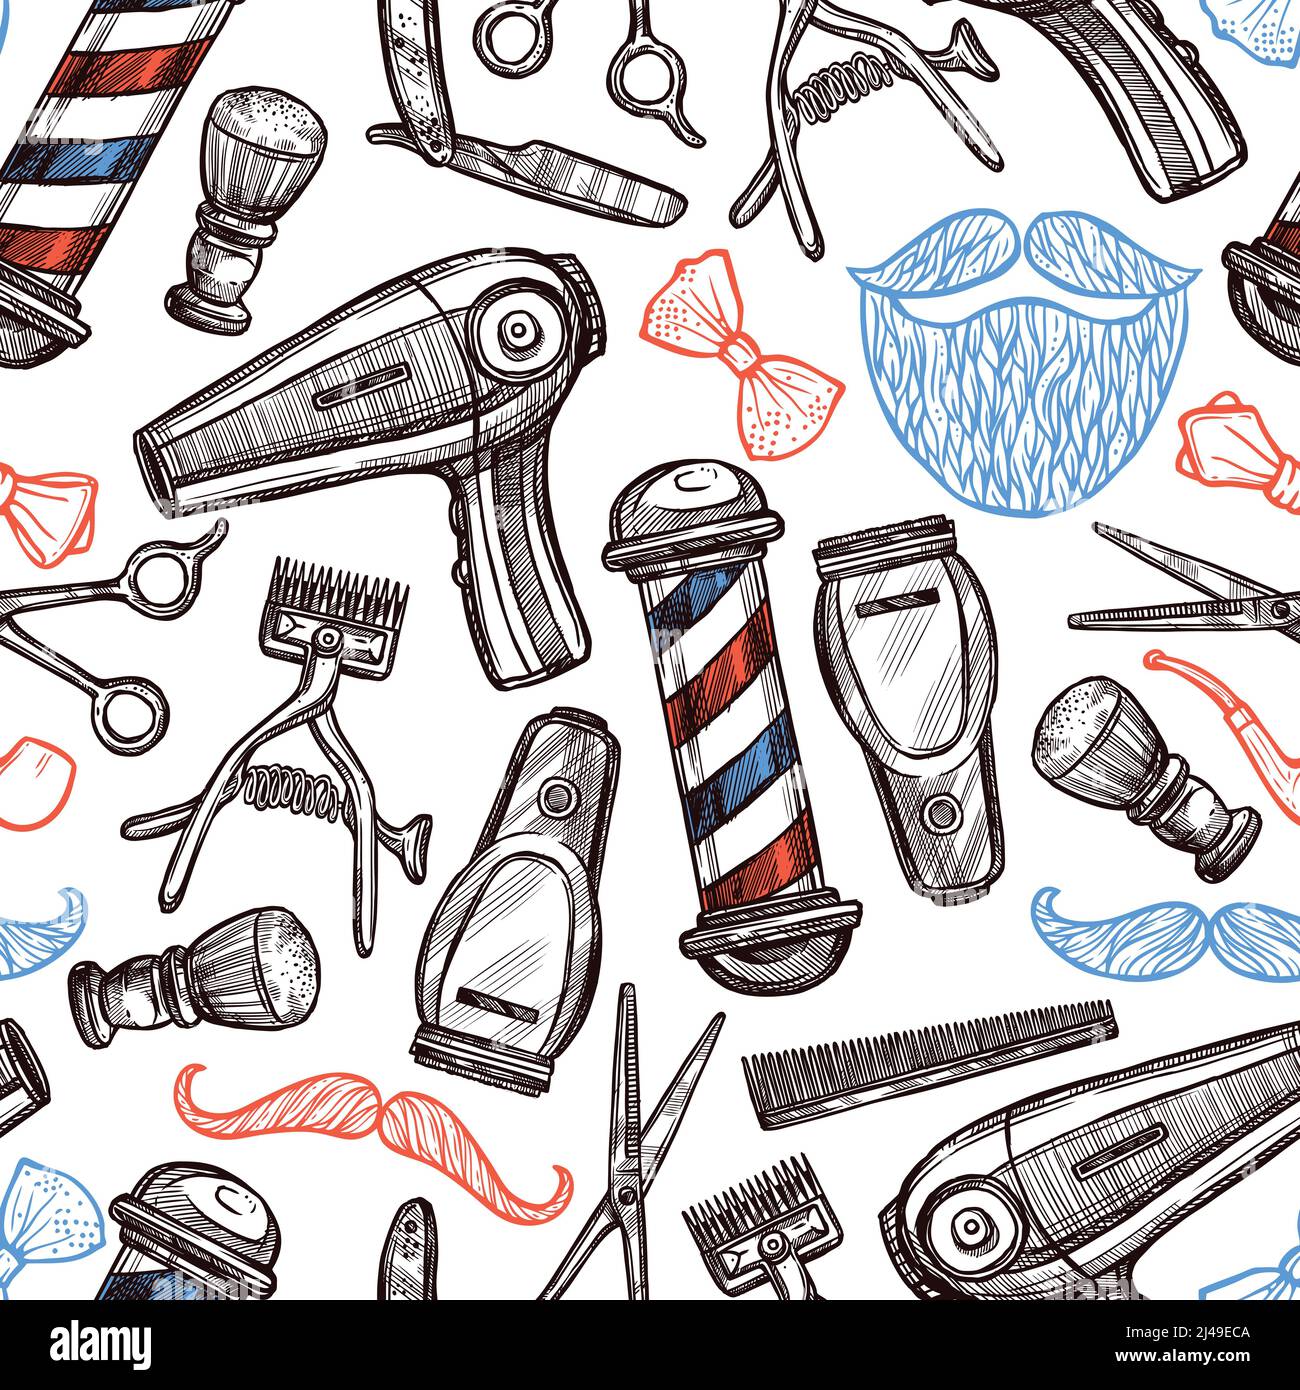 Barber shop wallpaper Cut Out Stock Images & Pictures - Alamy